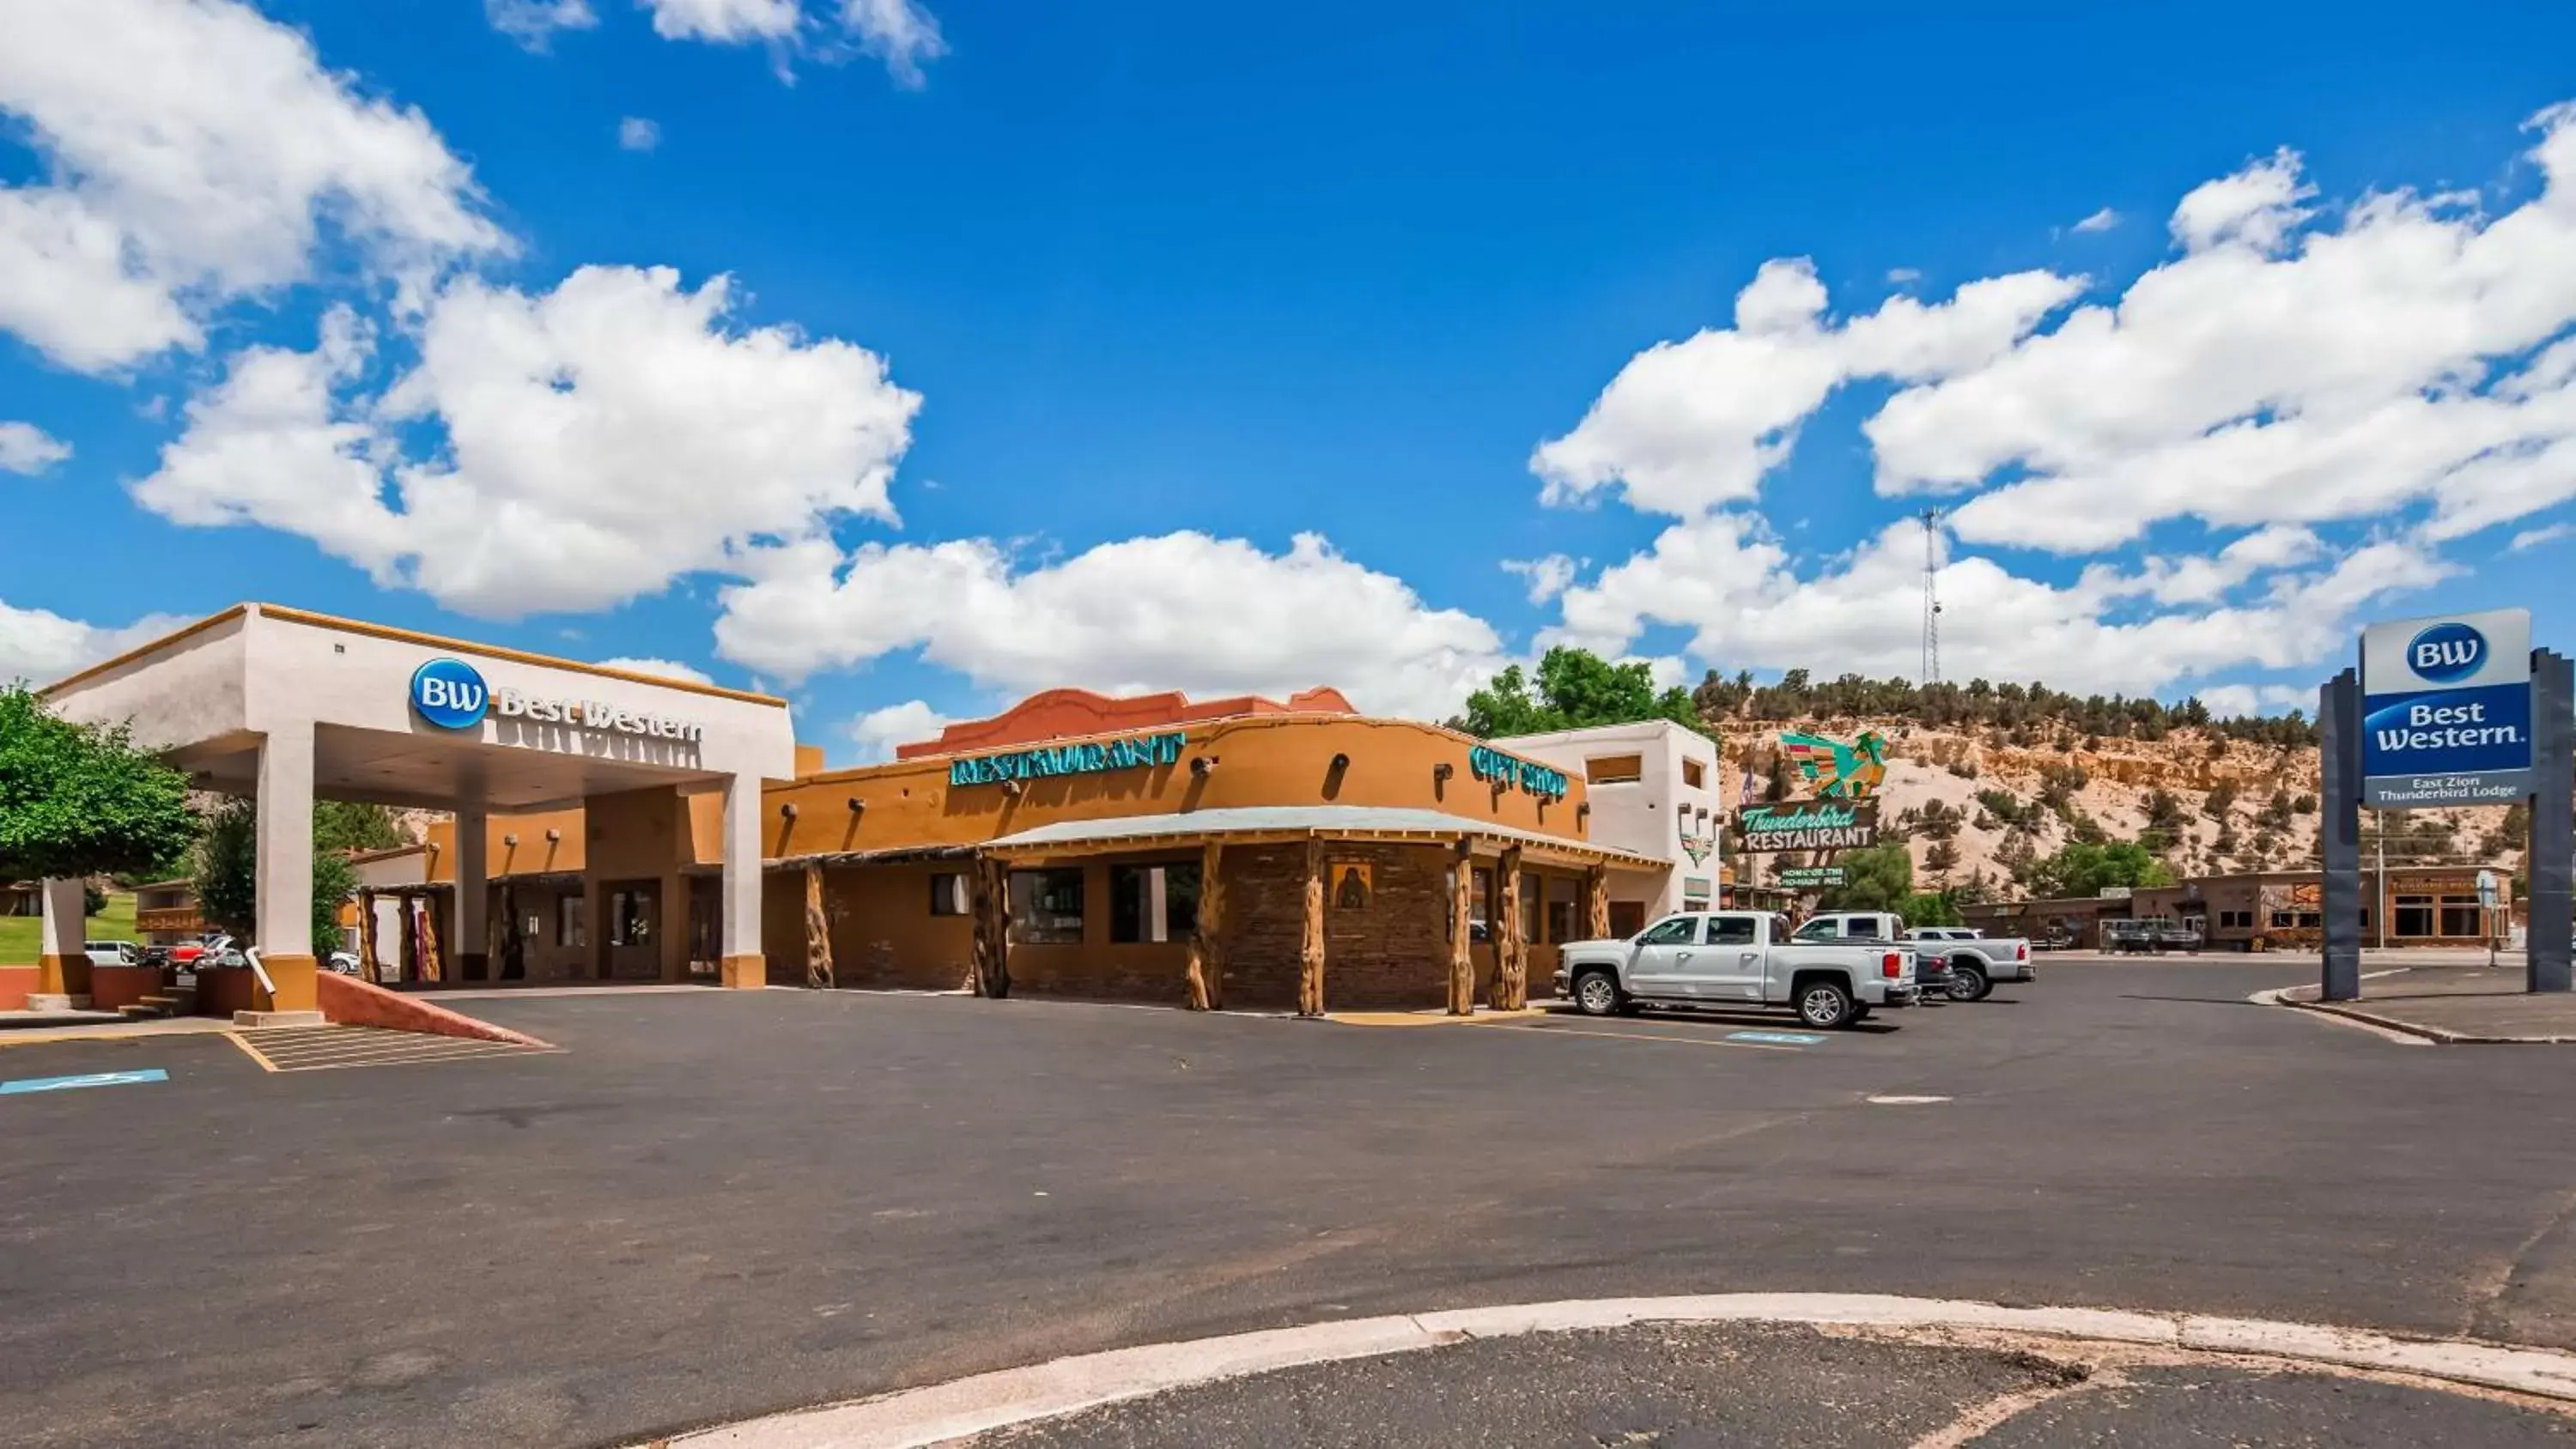 Property Building in Best Western East Zion Thunderbird Lodge